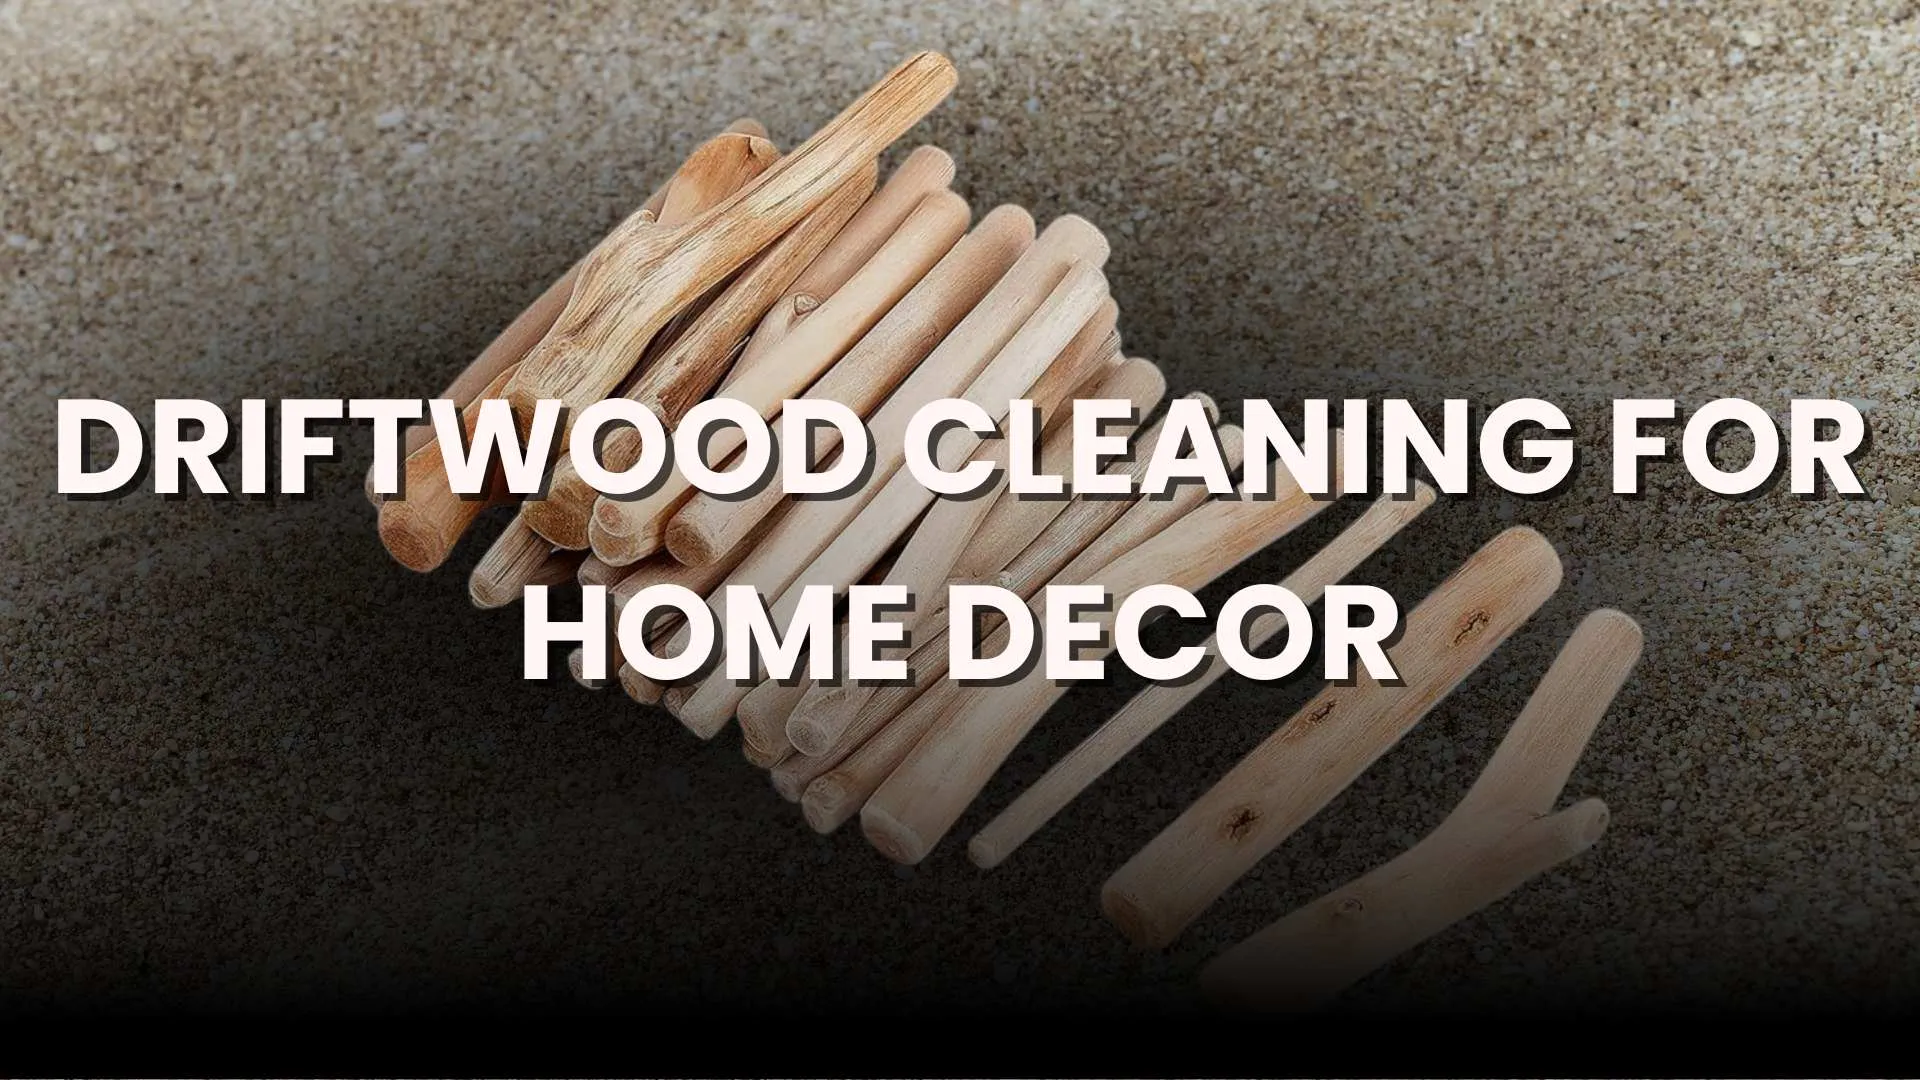 DRIFTWOOD CLEANING HOME DECOR